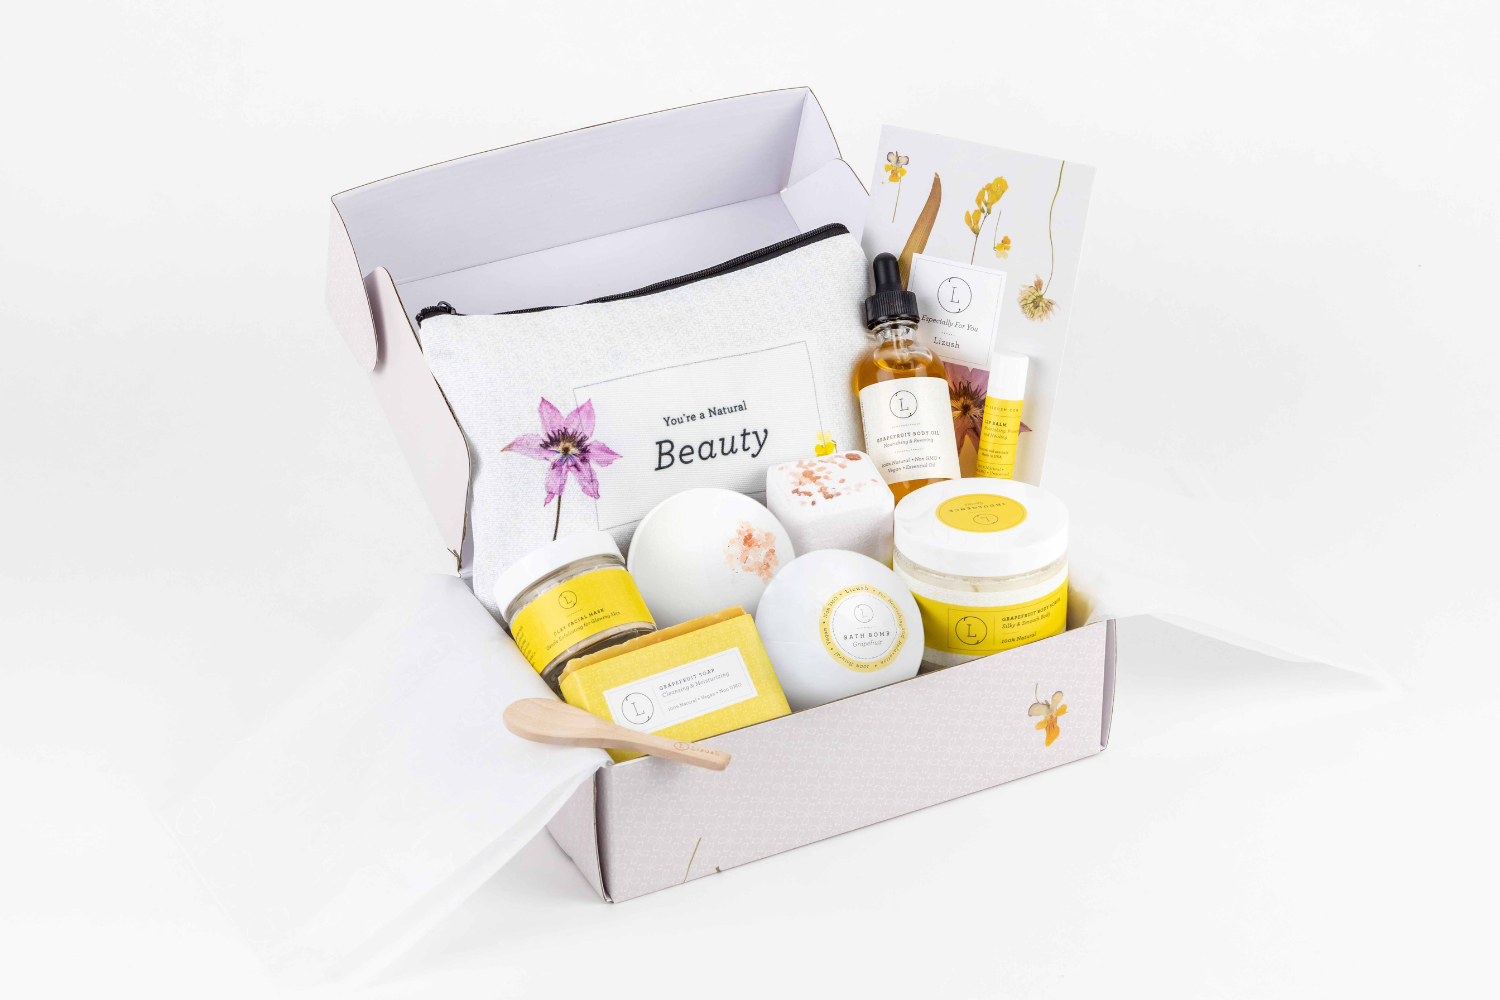 Summery Chrismas - Care Package, Handmade Natural Bath and Body Gift Box, Thank You Gift, Chrismas Gift box, Holiday spa box - Citrus full set with a FREE white sponge